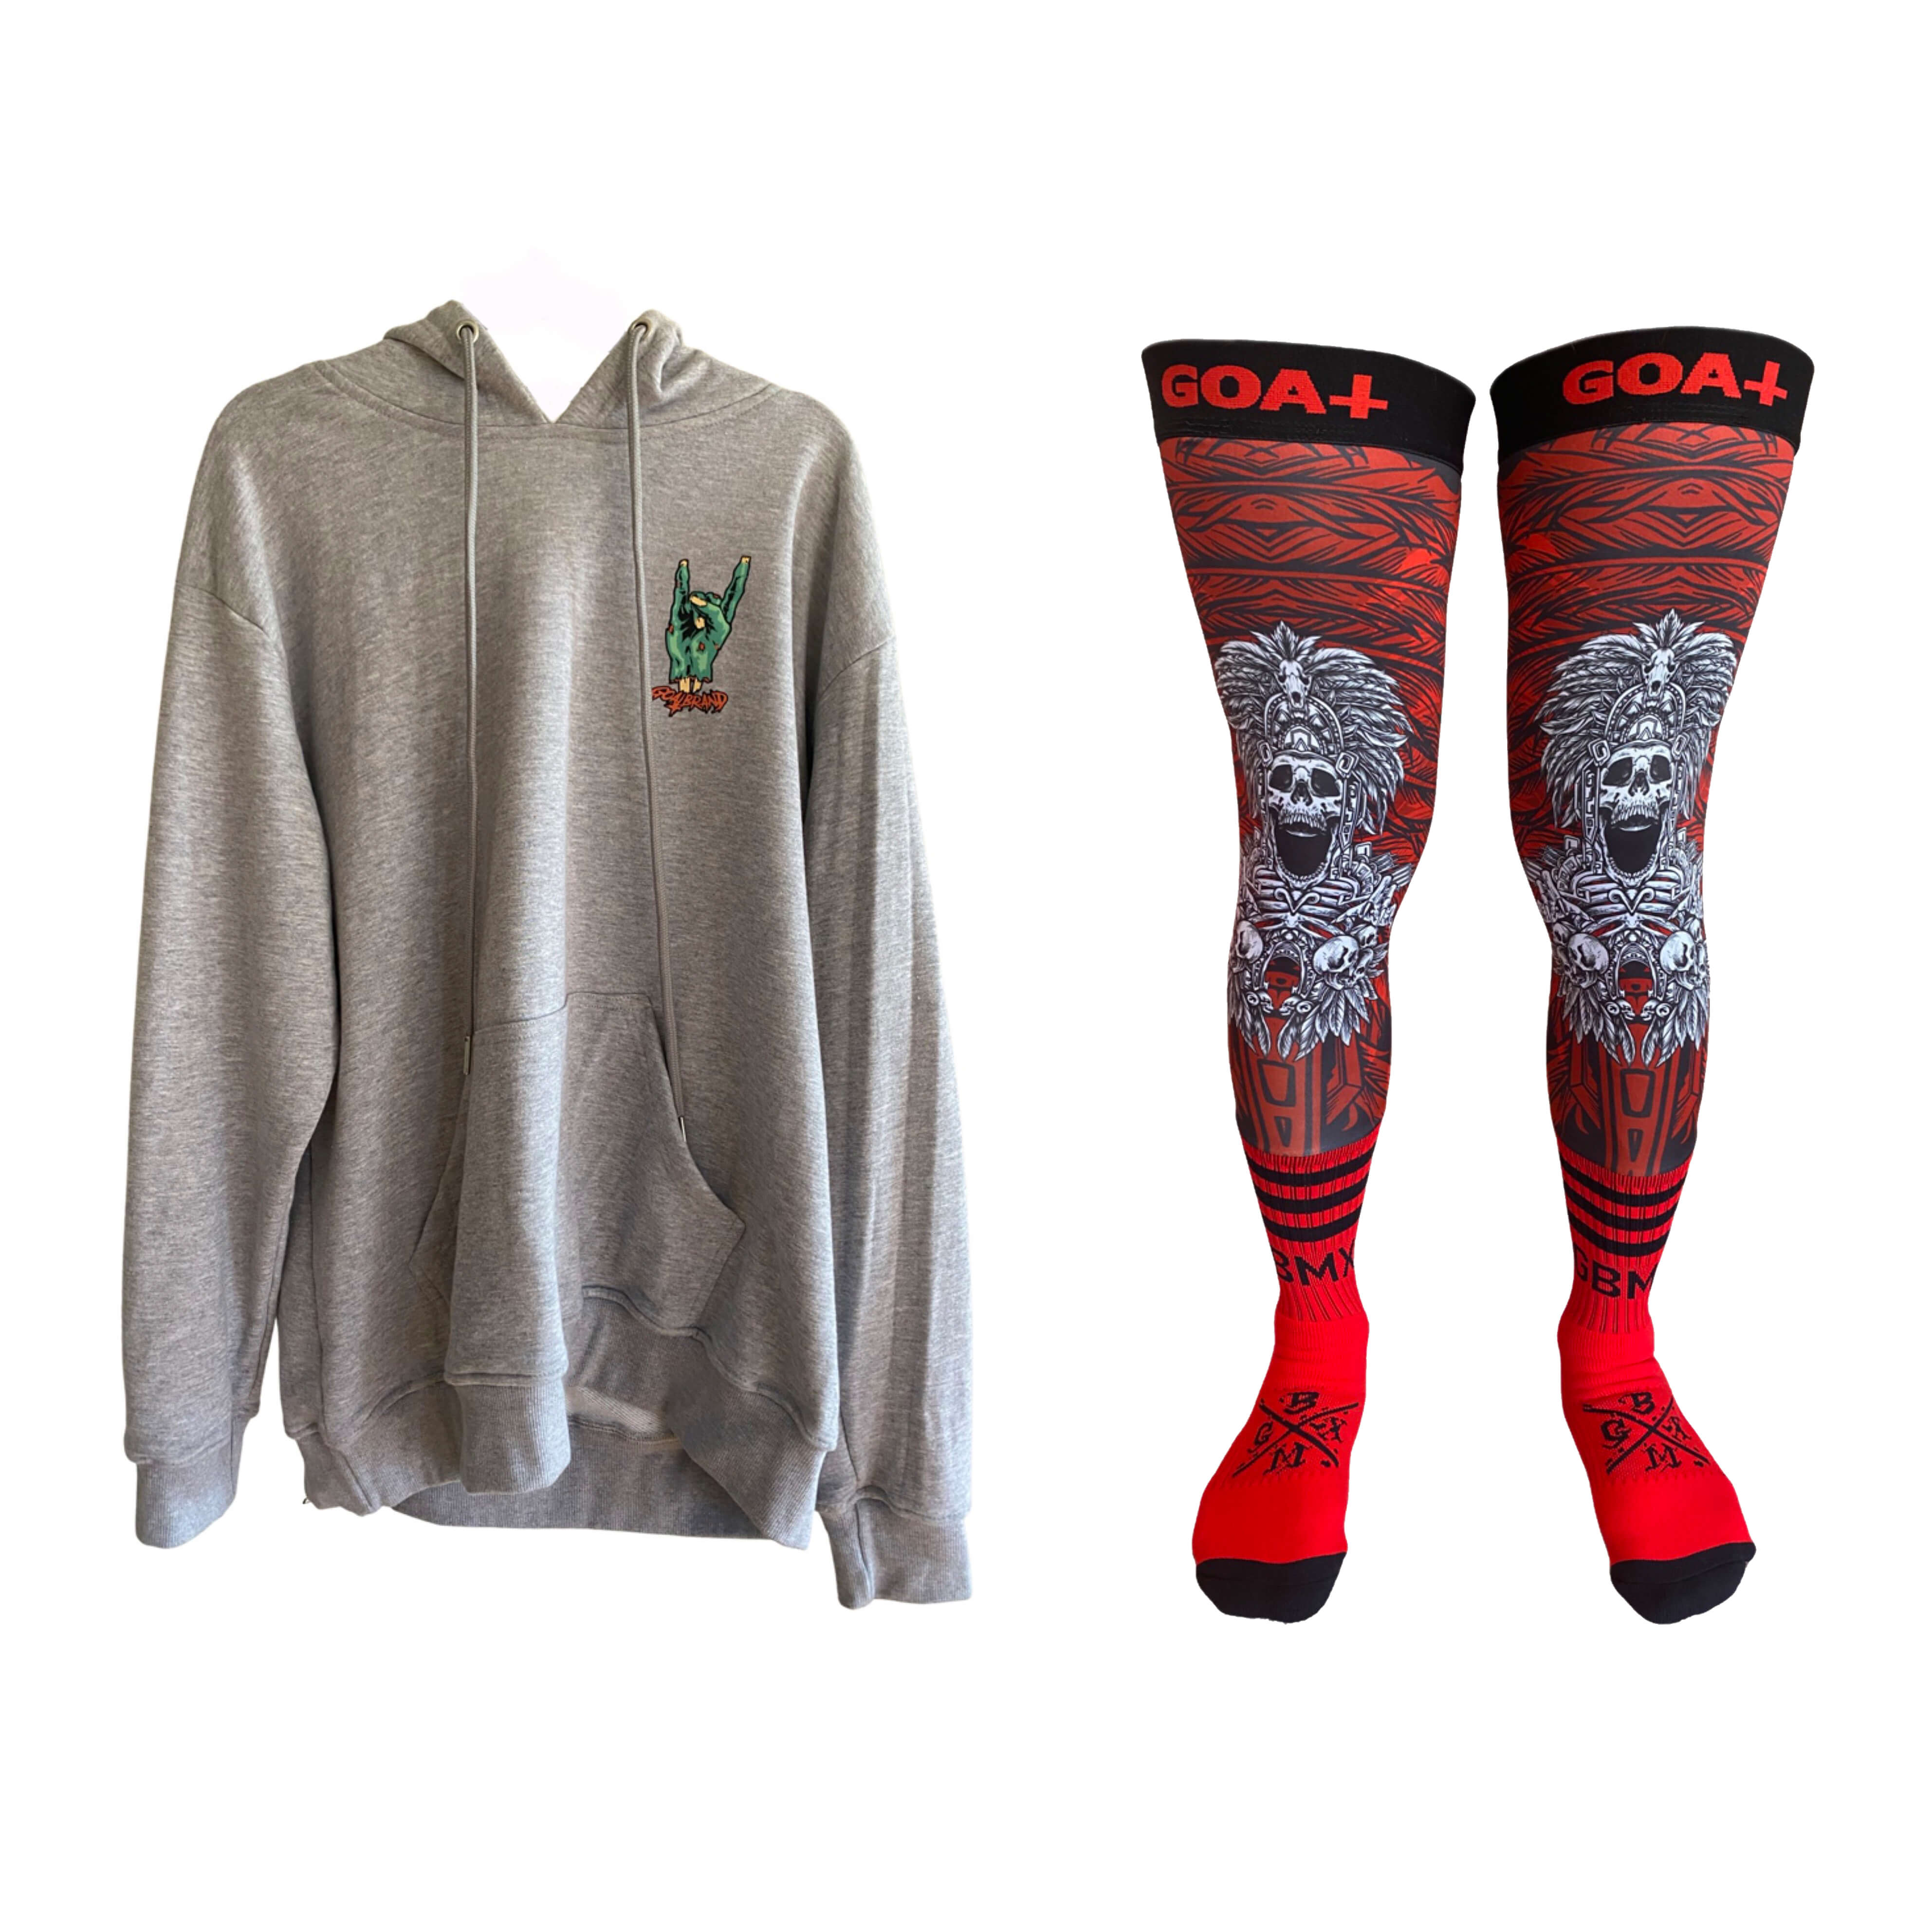 The Sock and Hoodie Combo